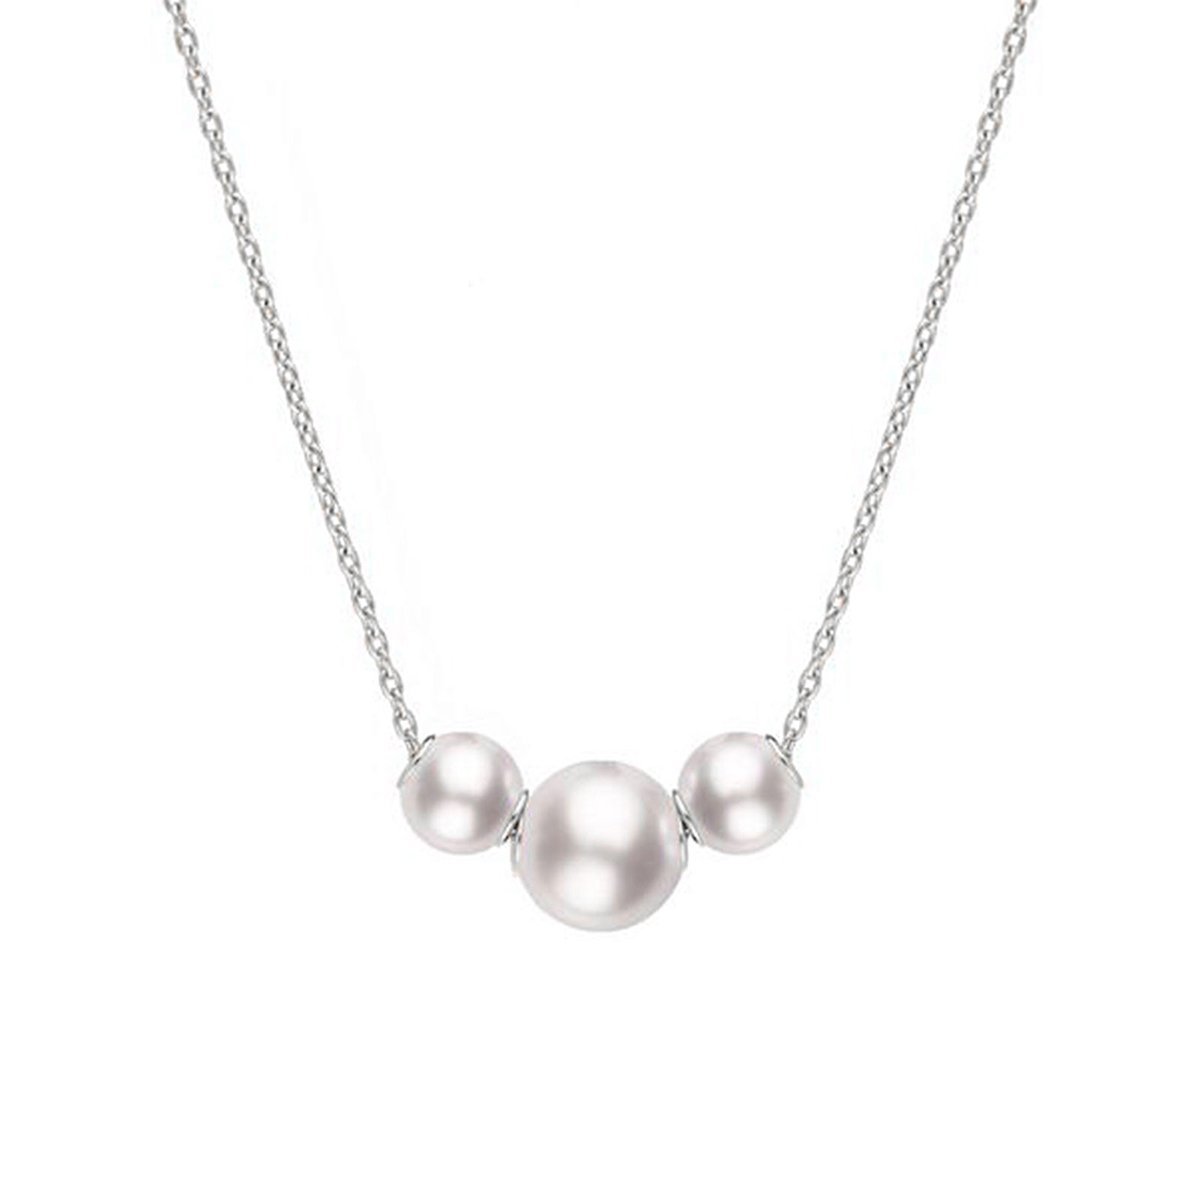 Pearls in Motion White Gold Pendant